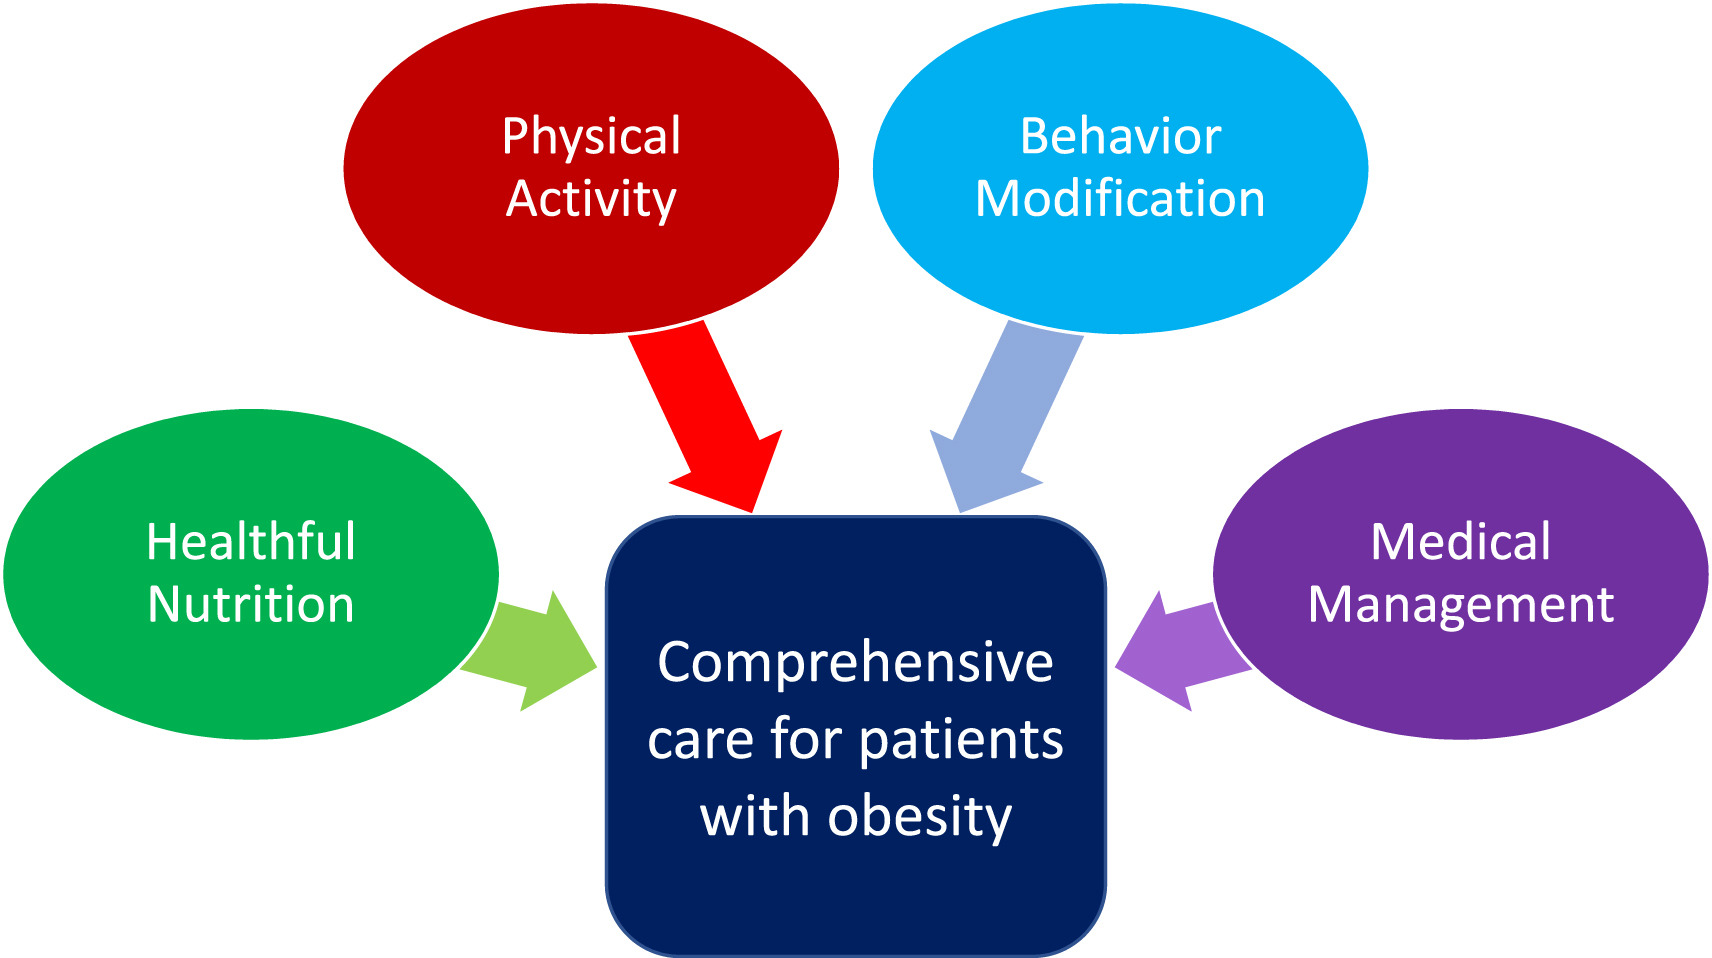 Comprehensive care for patients with obesity includes nutrition, activity, behavior, and medication